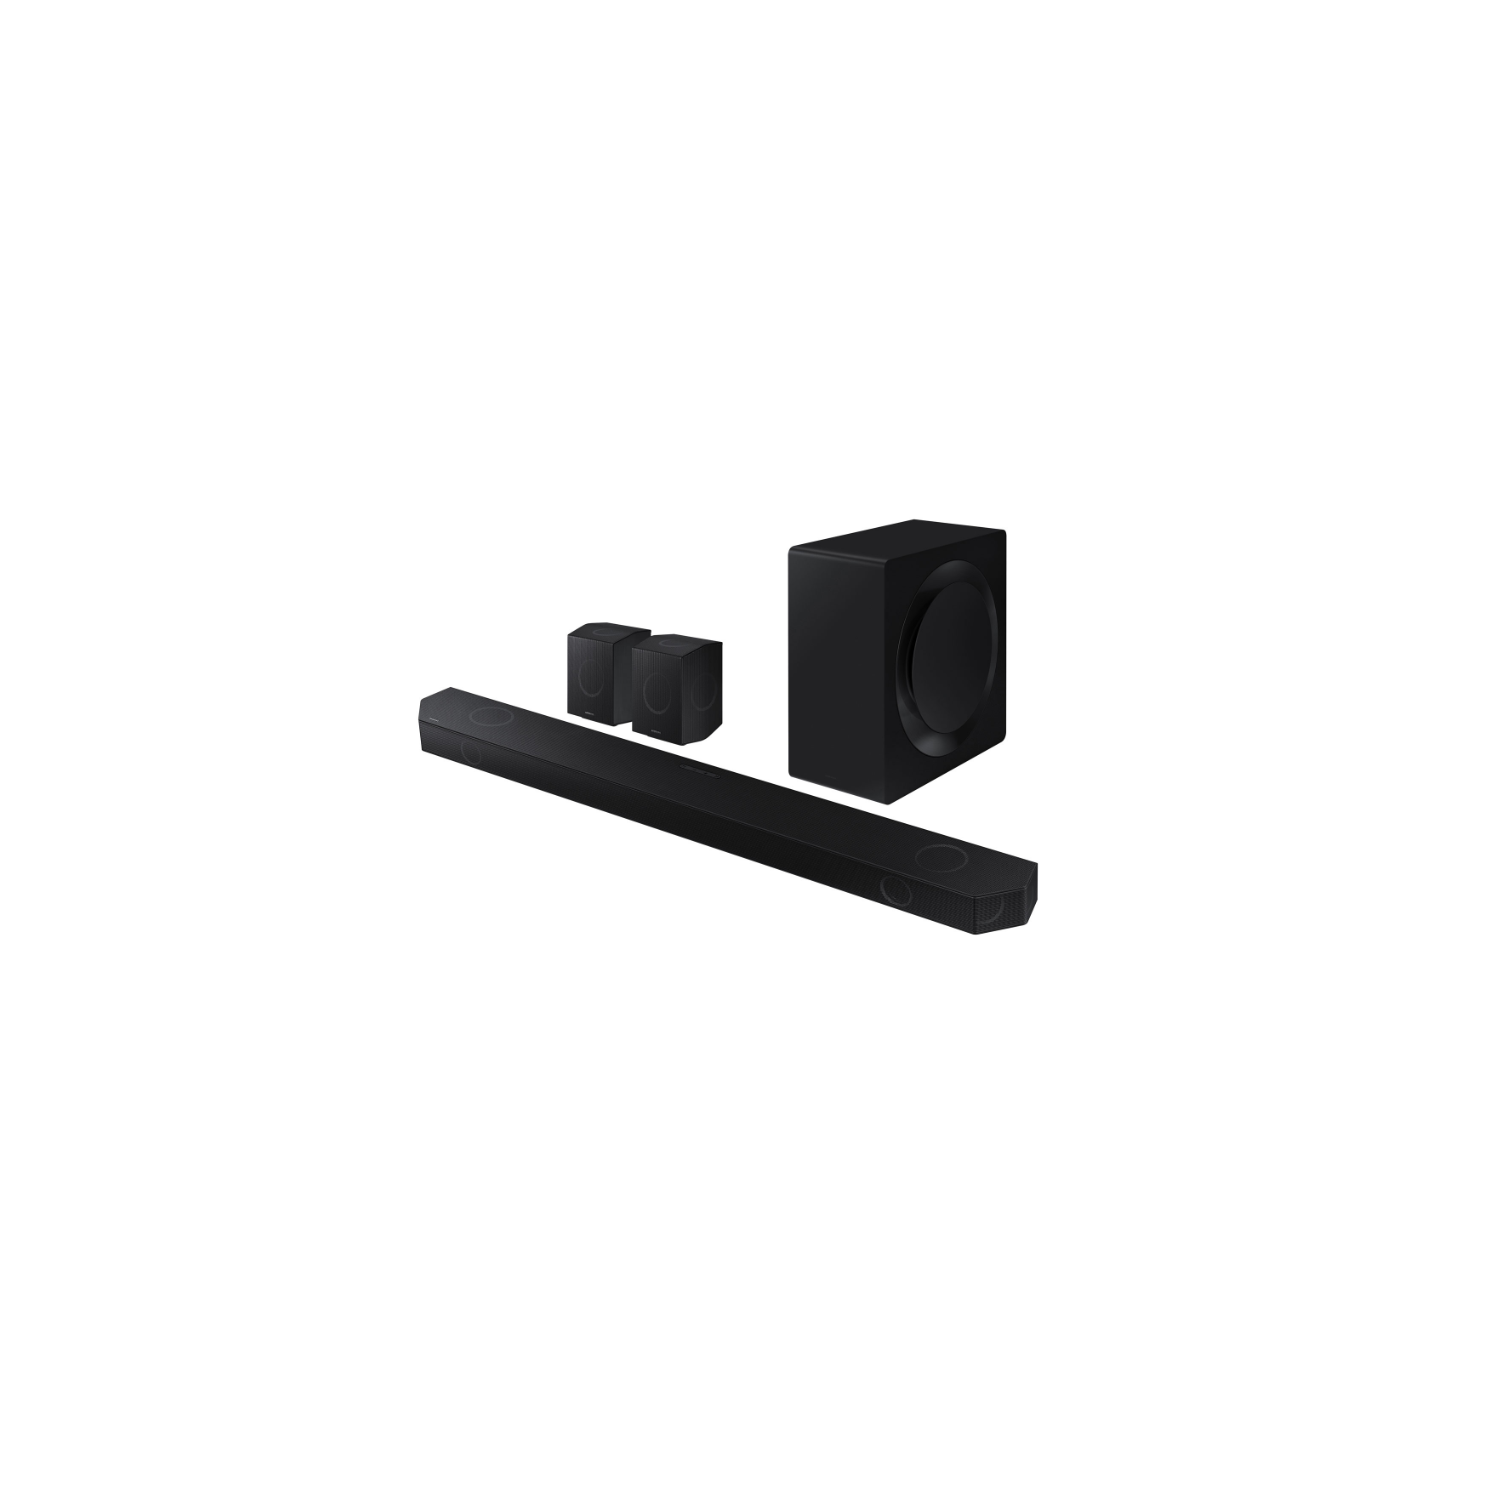 Samsung HW-Q990D/ZC 11.1.4 Channel Sound Bar with Wireless Subwoofer & Up-Firing Rear Speakers - Graphite Black OPEN BOX 10/10